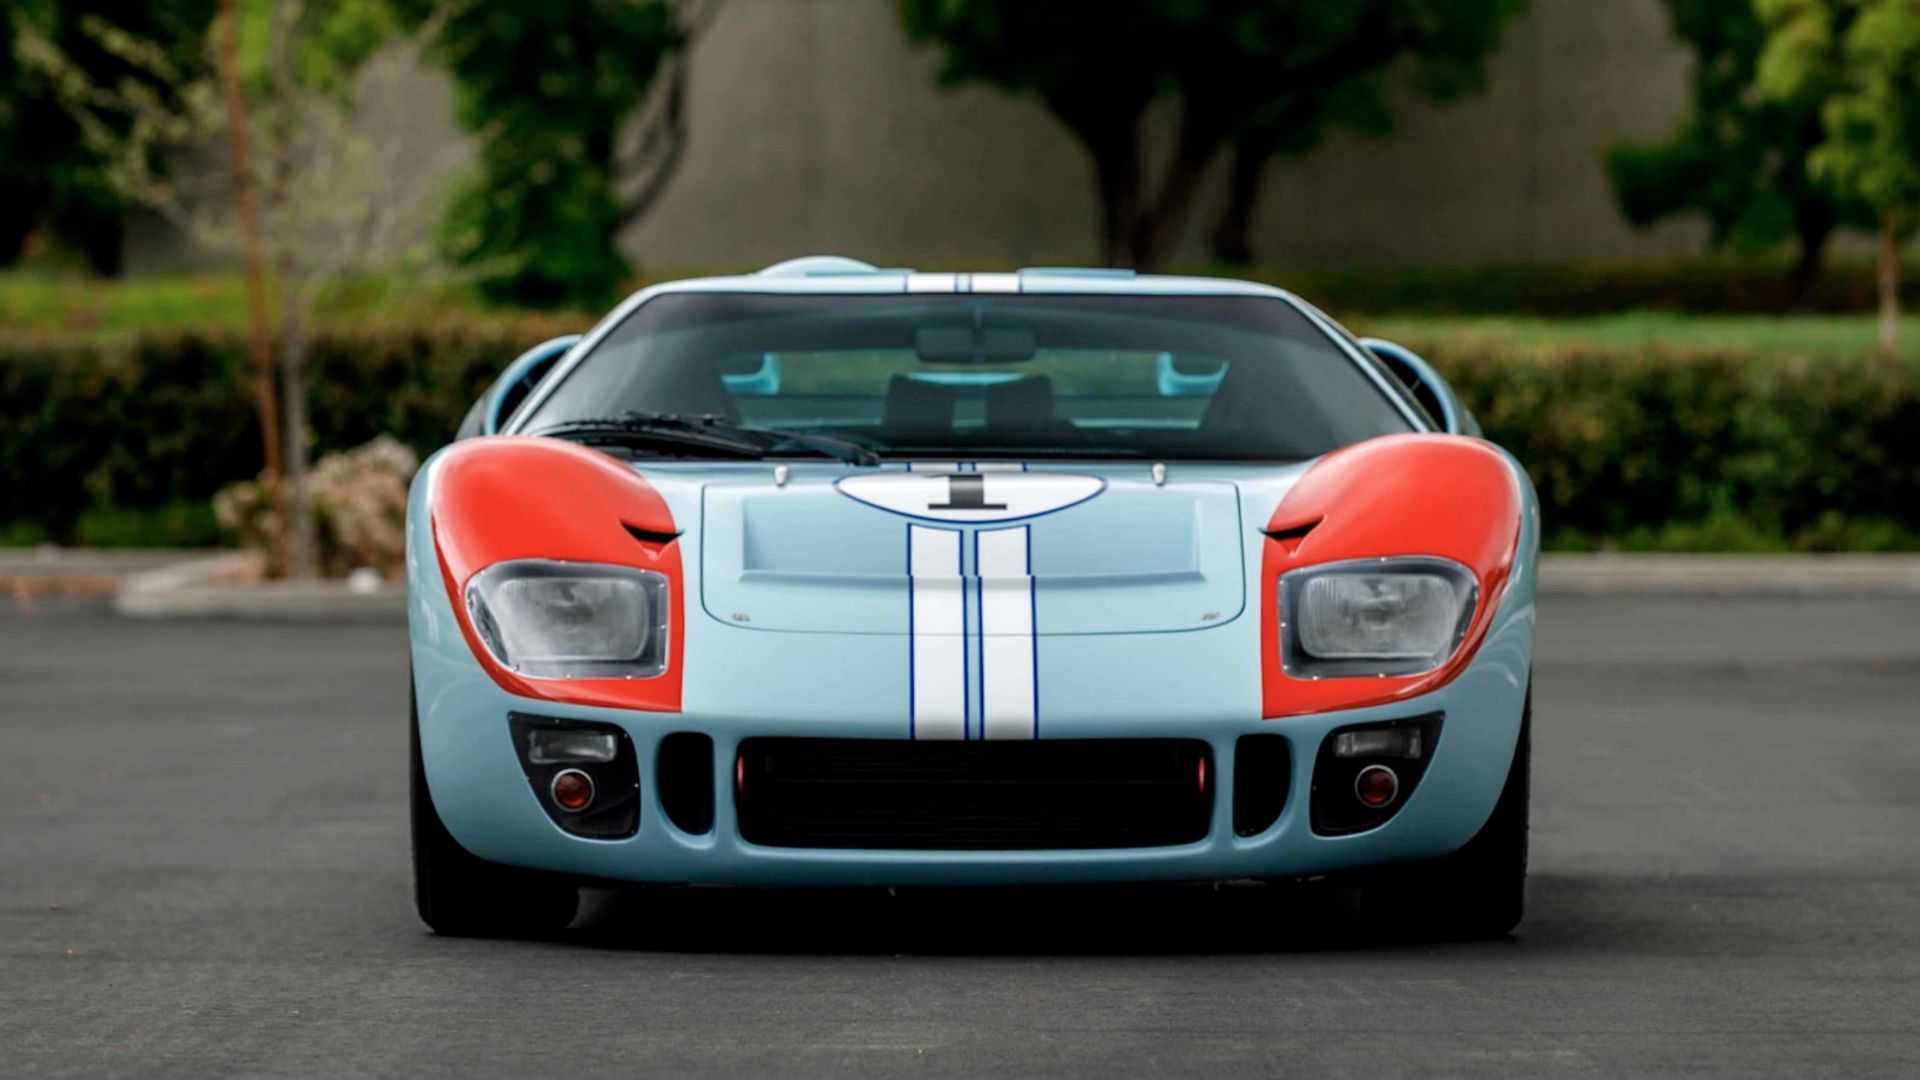 Ford Gt40 Mk Ii Wallpapers